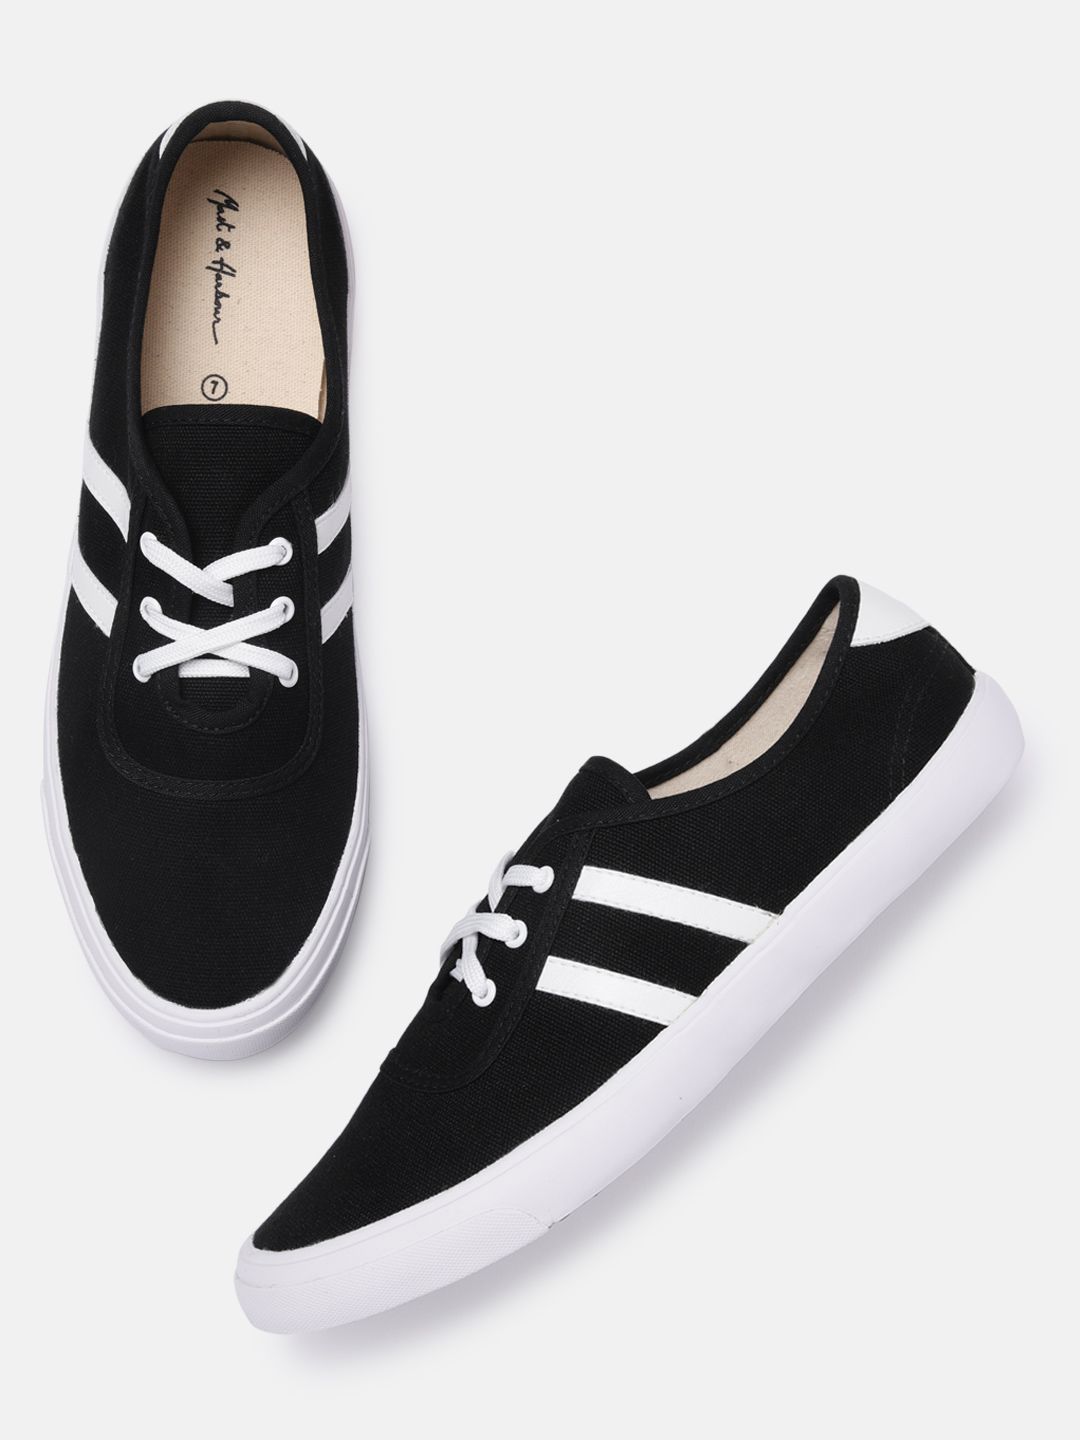 Mast & Harbour Women Black Striped Sneakers Price in India